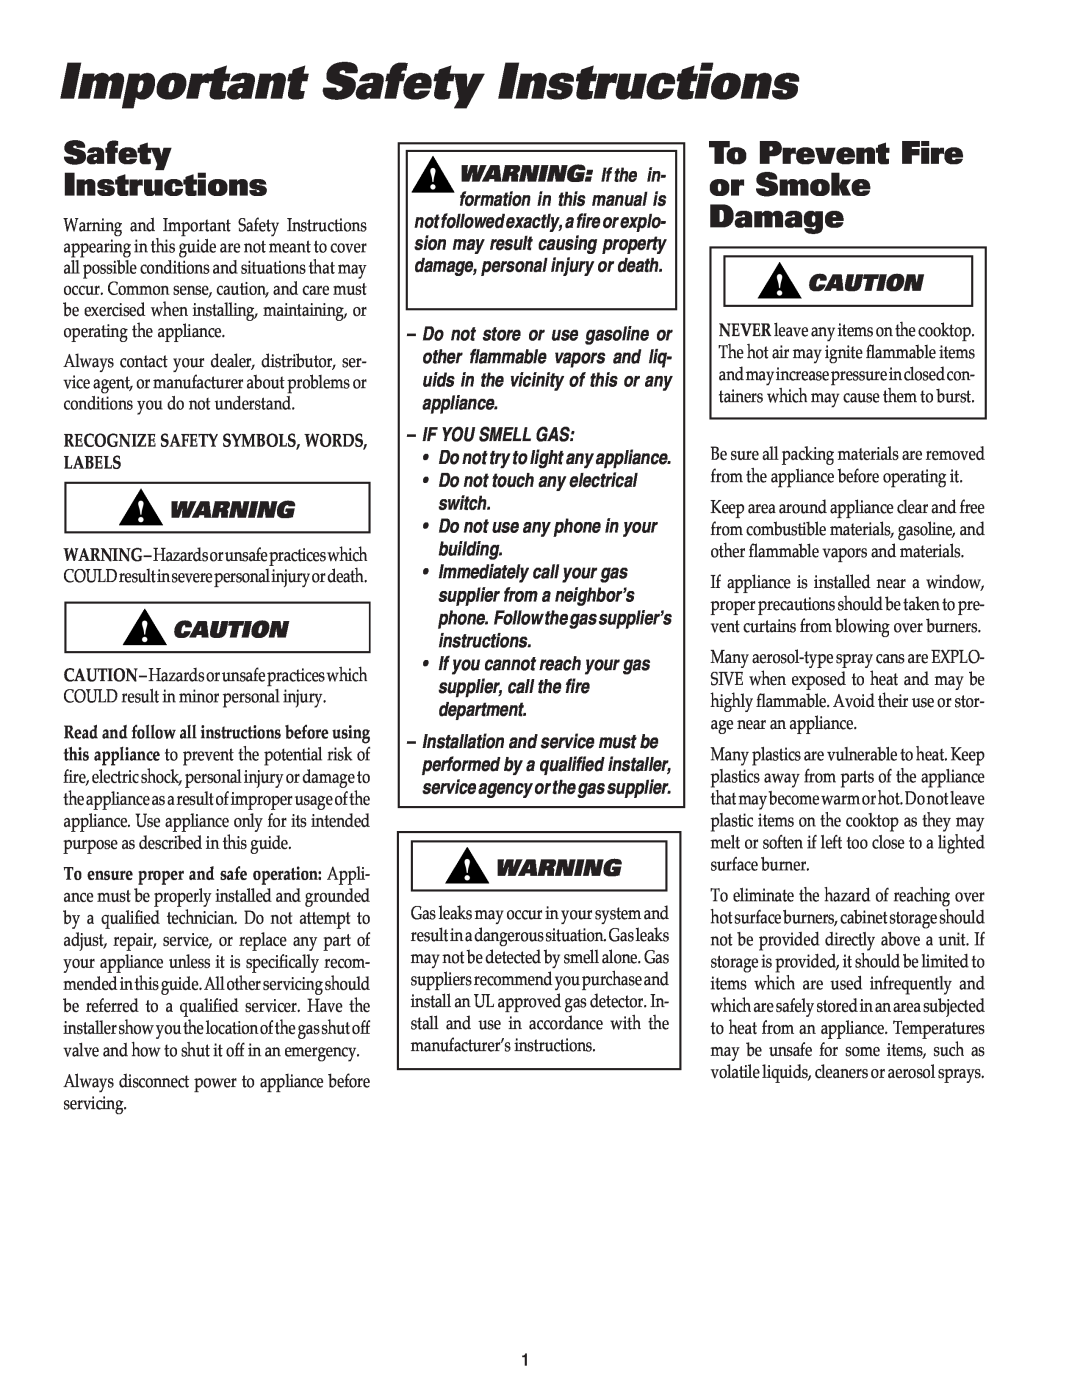 Maytag MGC4436BDB Important Safety Instructions, To Prevent Fire or Smoke Damage, Recognize Safety Symbols, Words, Labels 